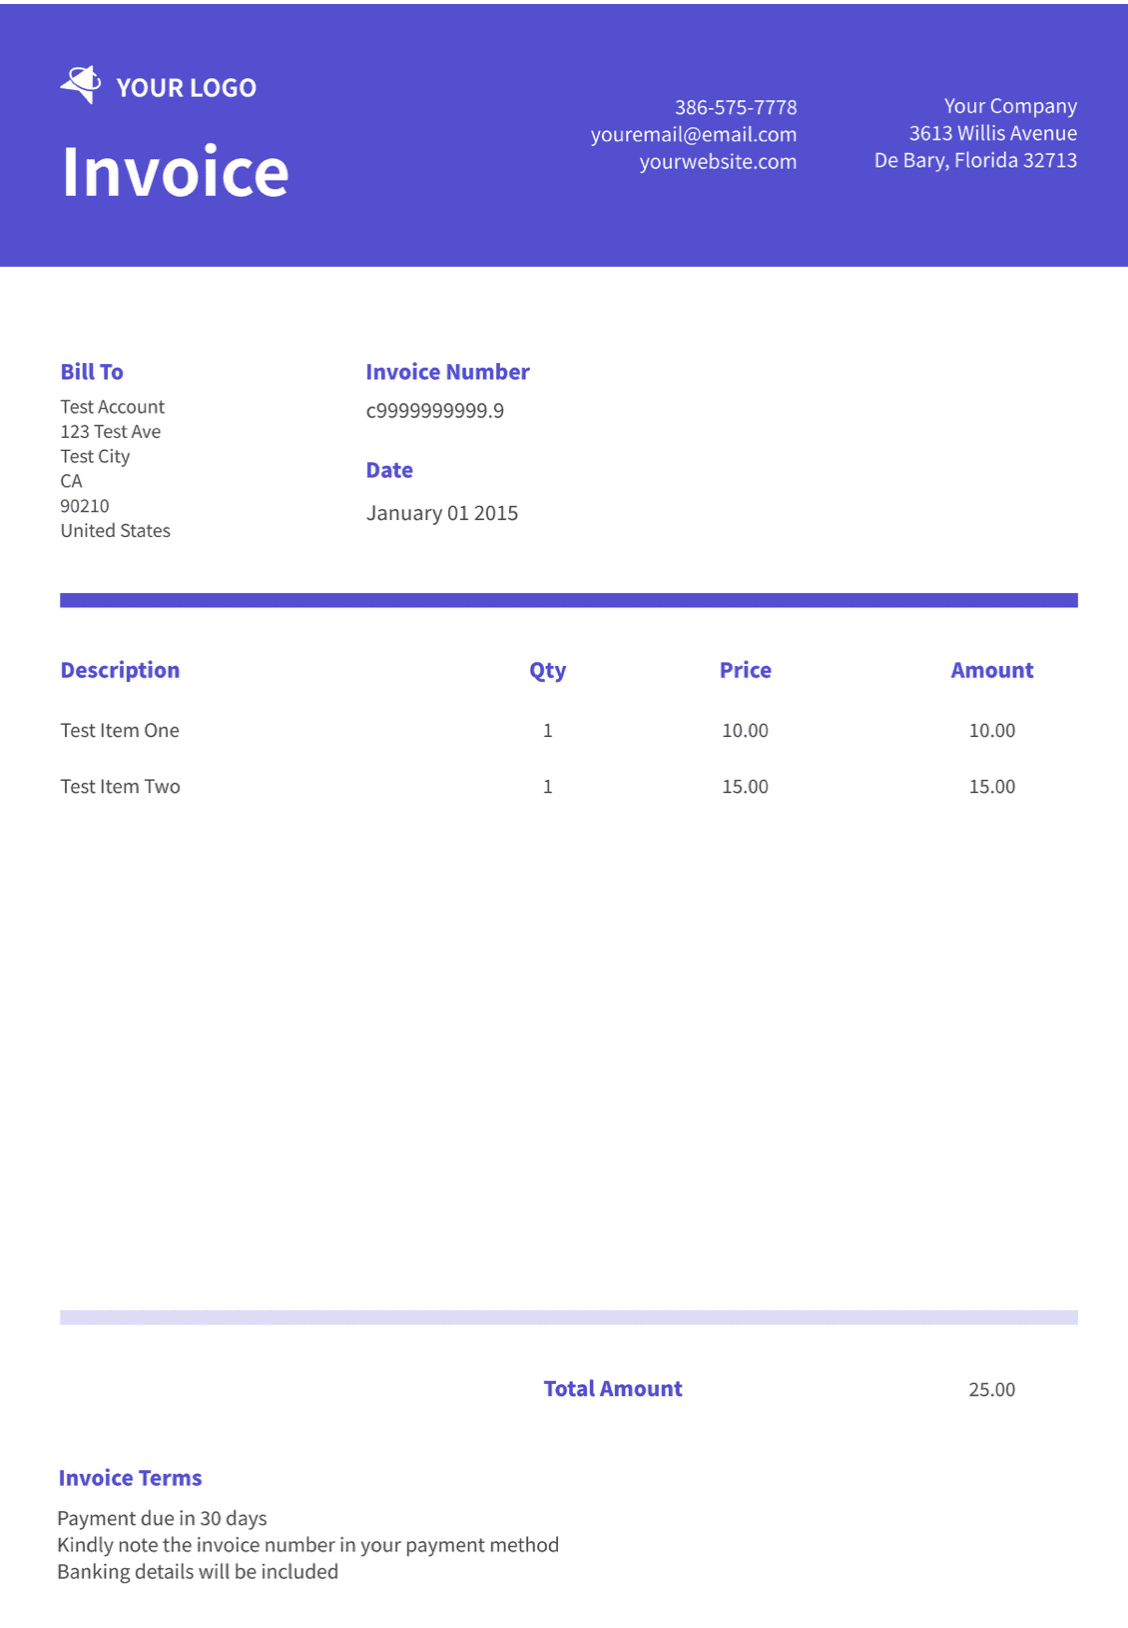 Invoice example of final template